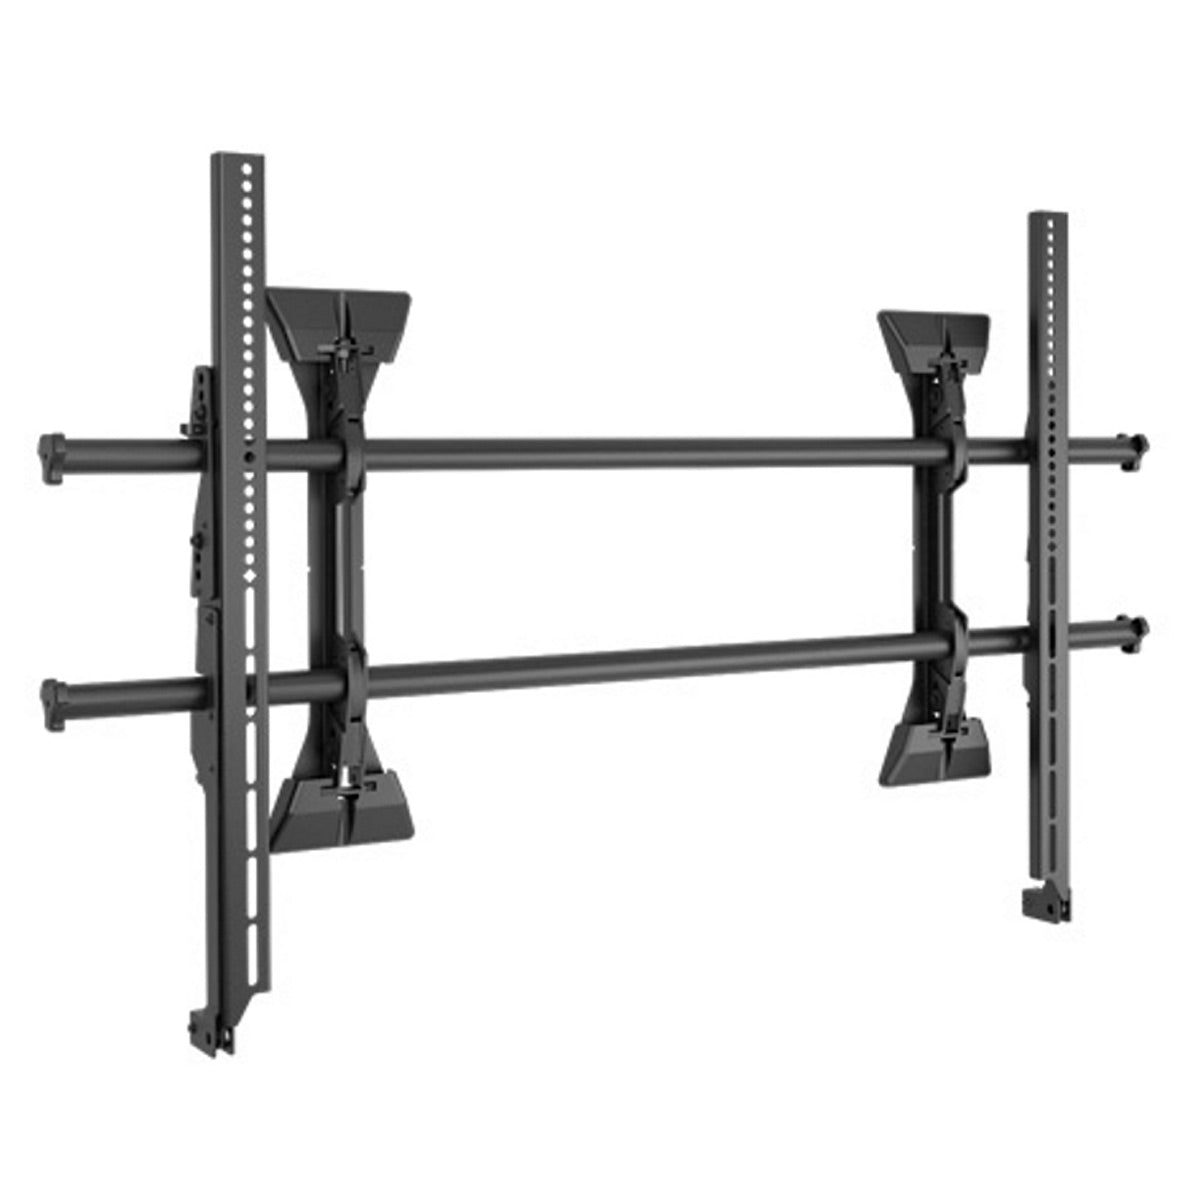 Chief XSM1U Large Fusion Adjustable Fixed TV Mount for 55" - 82"